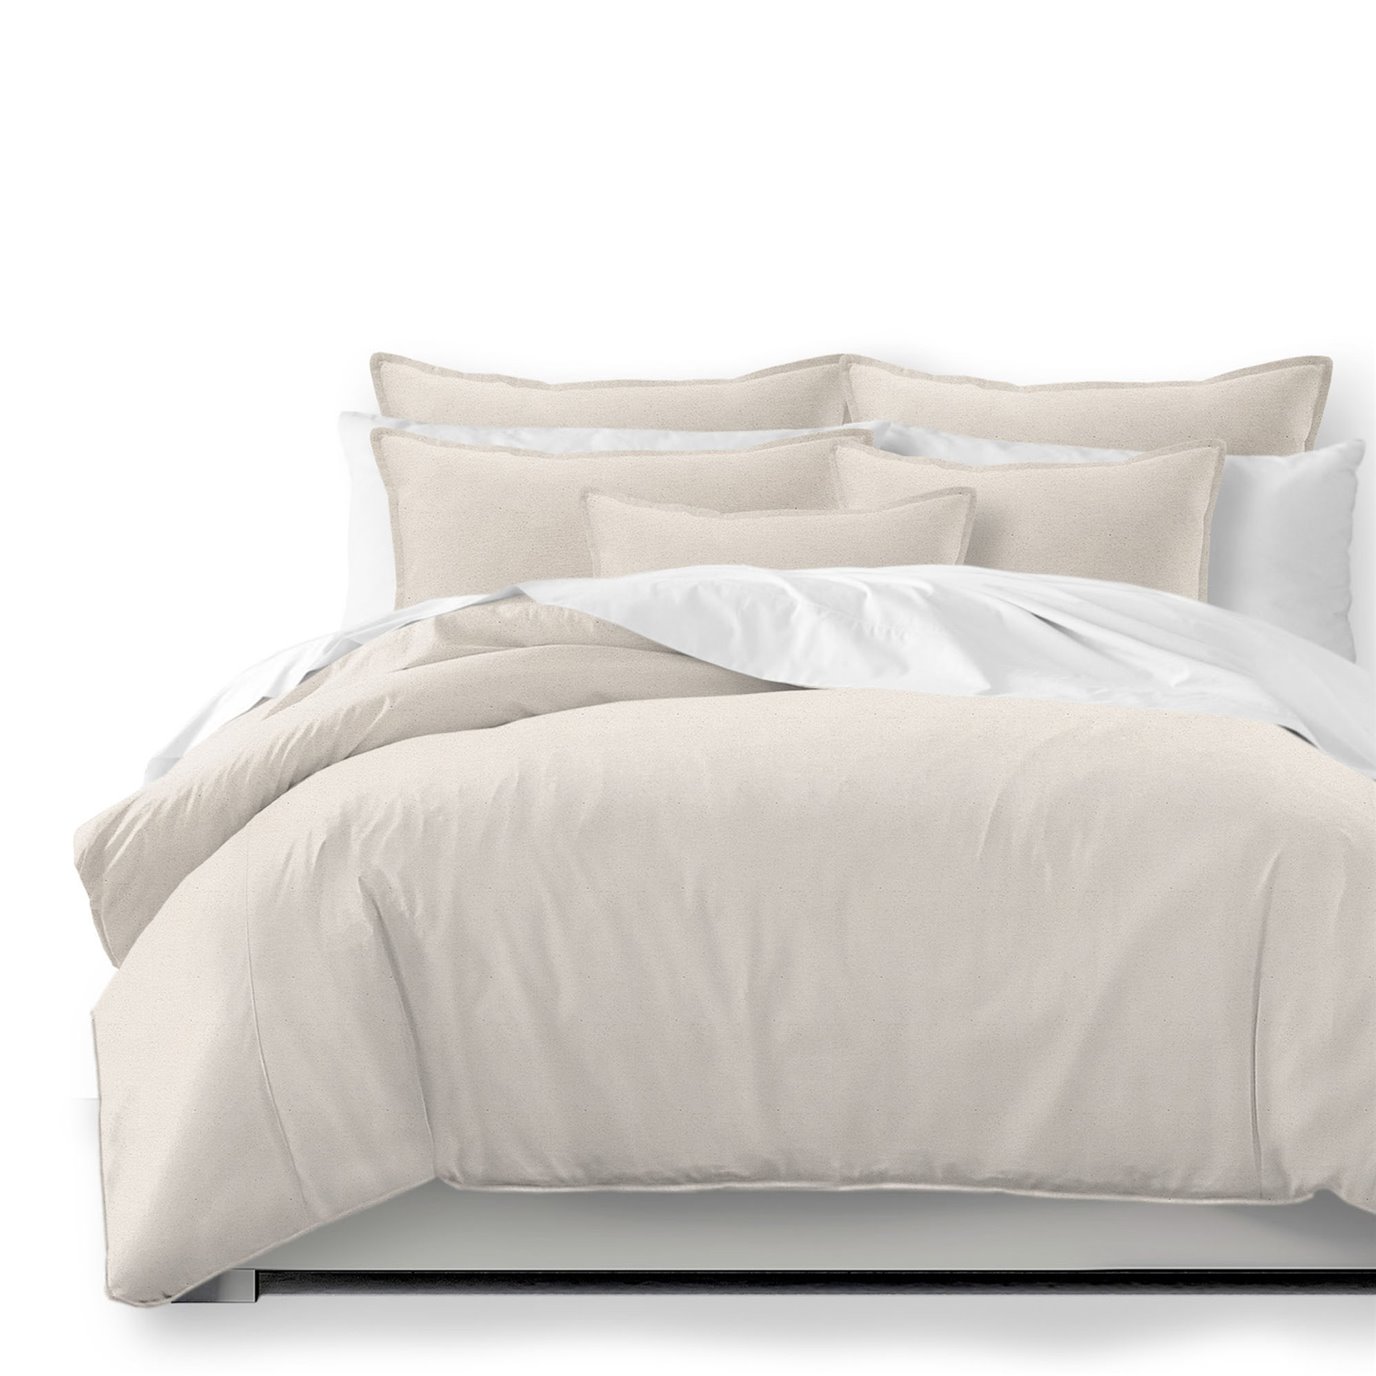 Braxton Natural Coverlet and Pillow Sham(s) Set - Size Super King